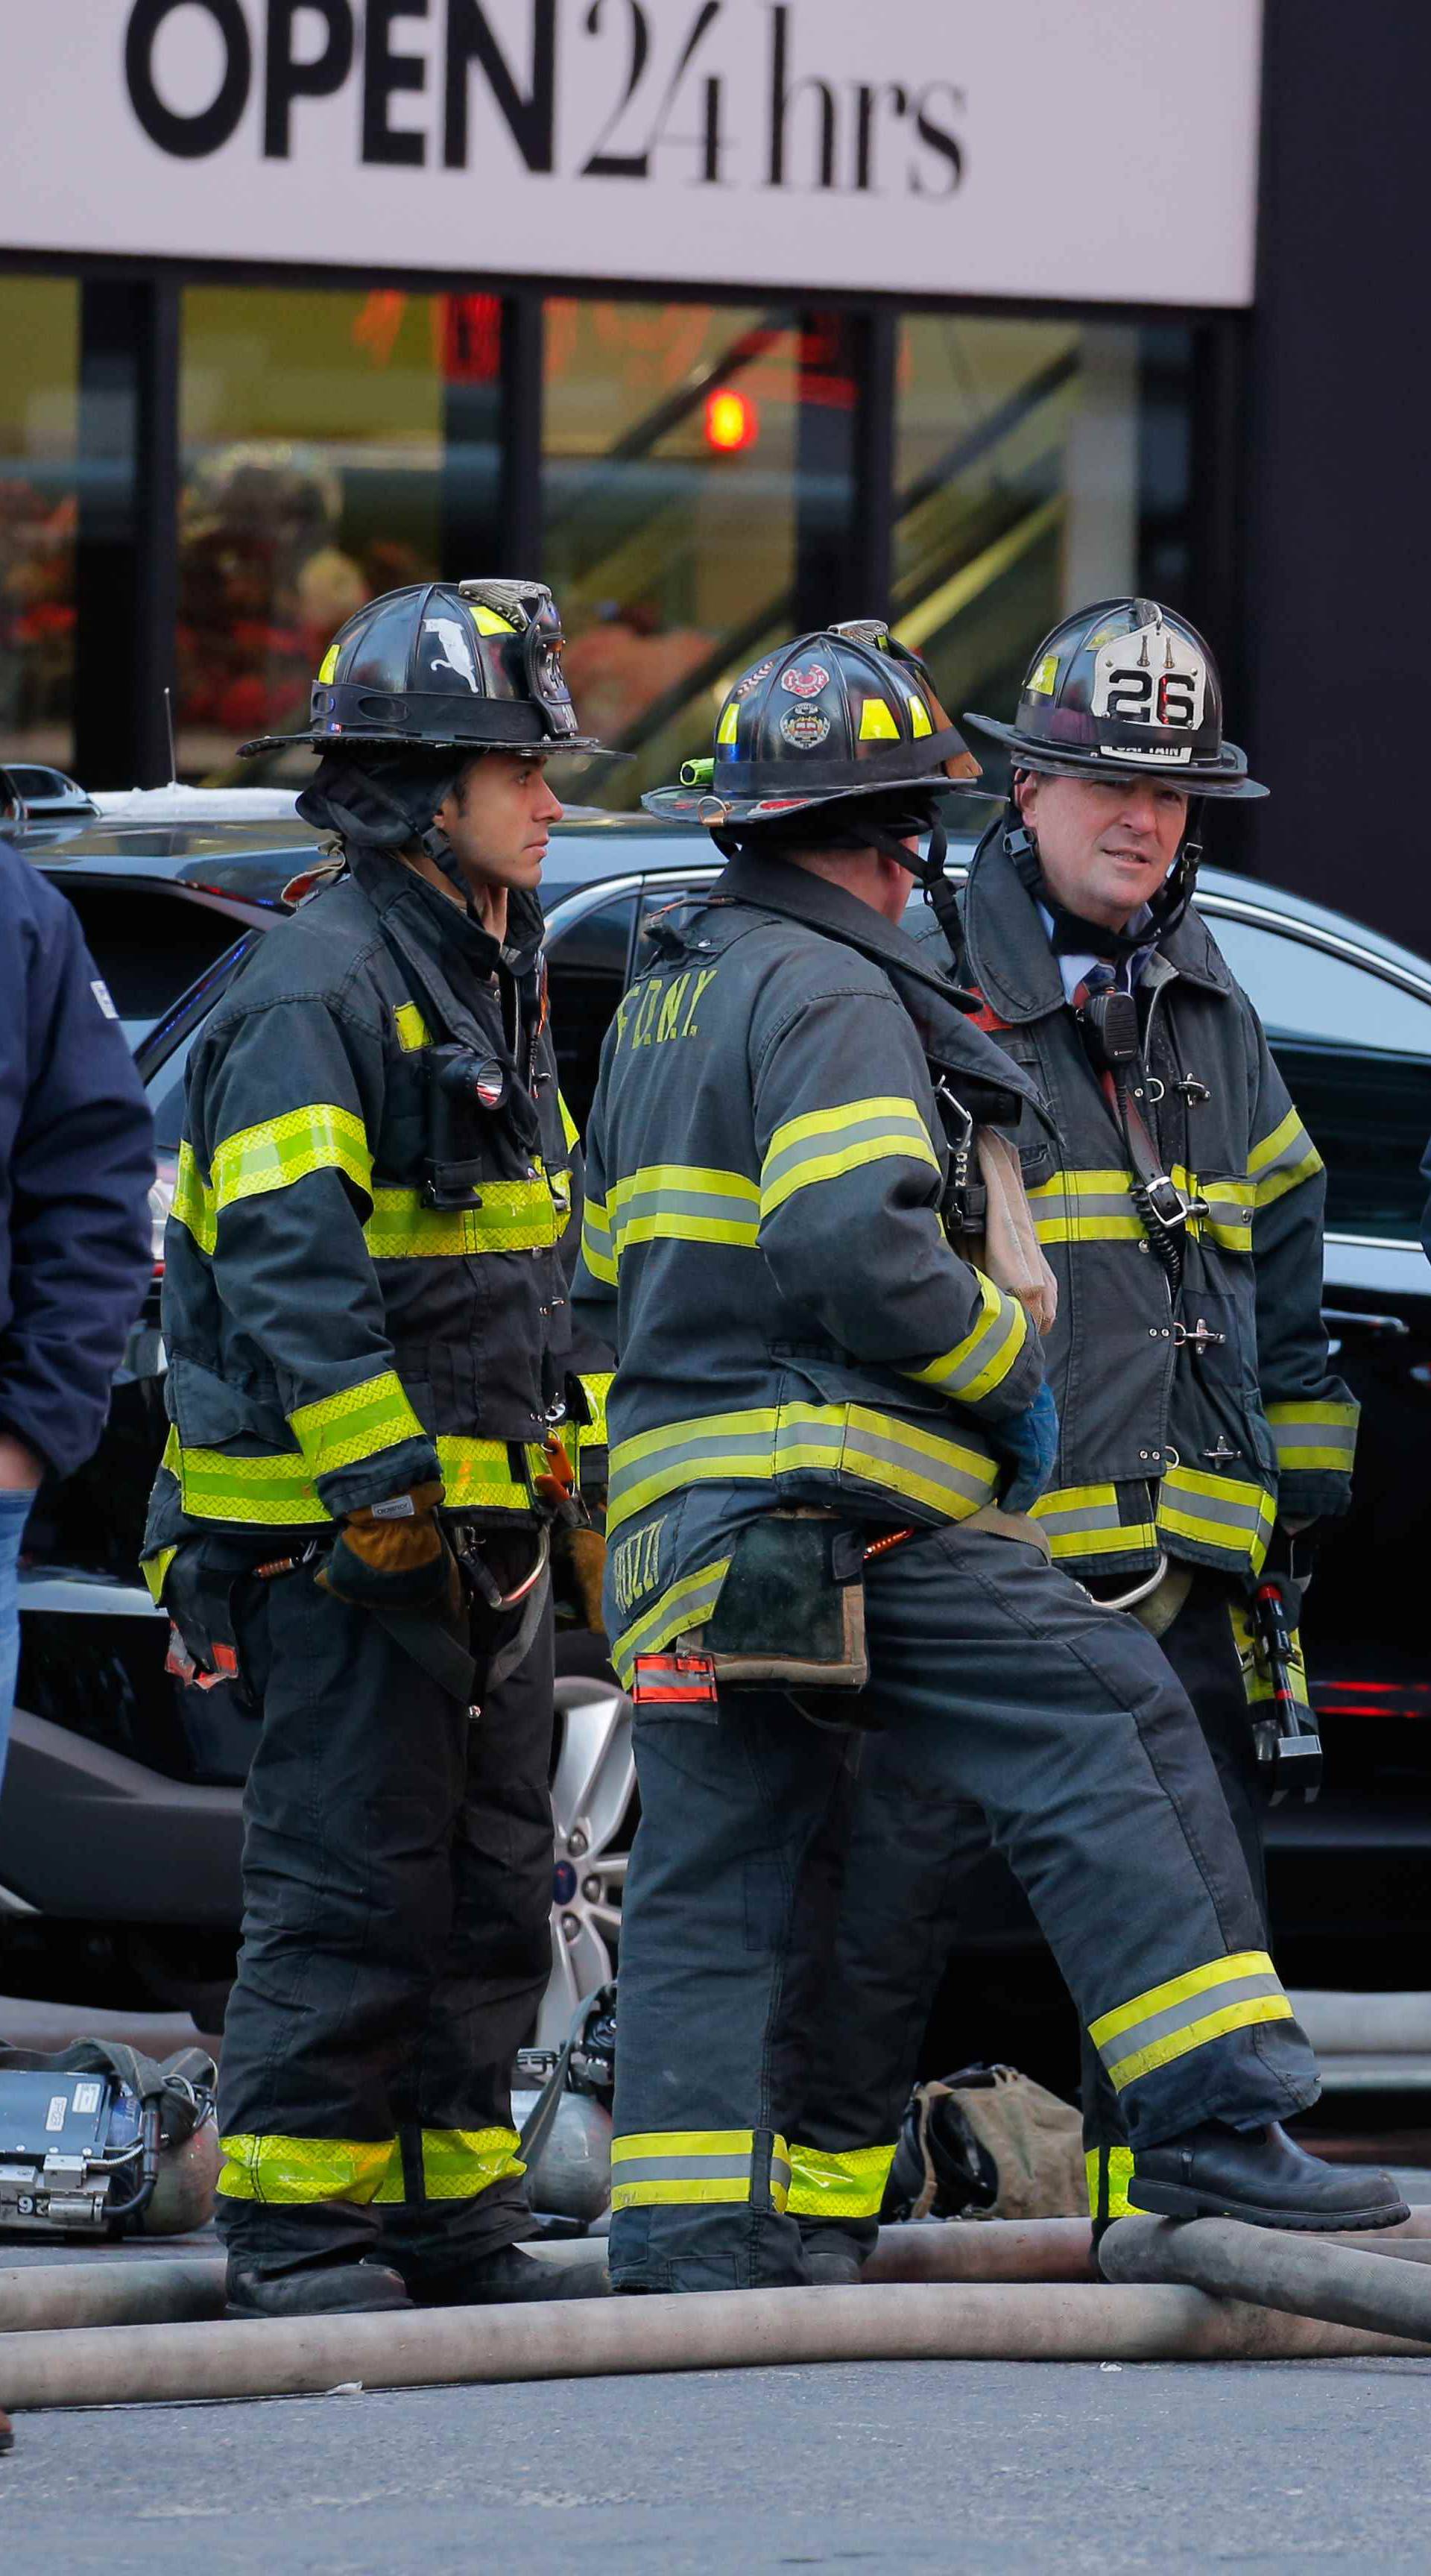 Fire crews stand outside the New York Port Authority Bus Terminal in New York City after reports of an explosion.